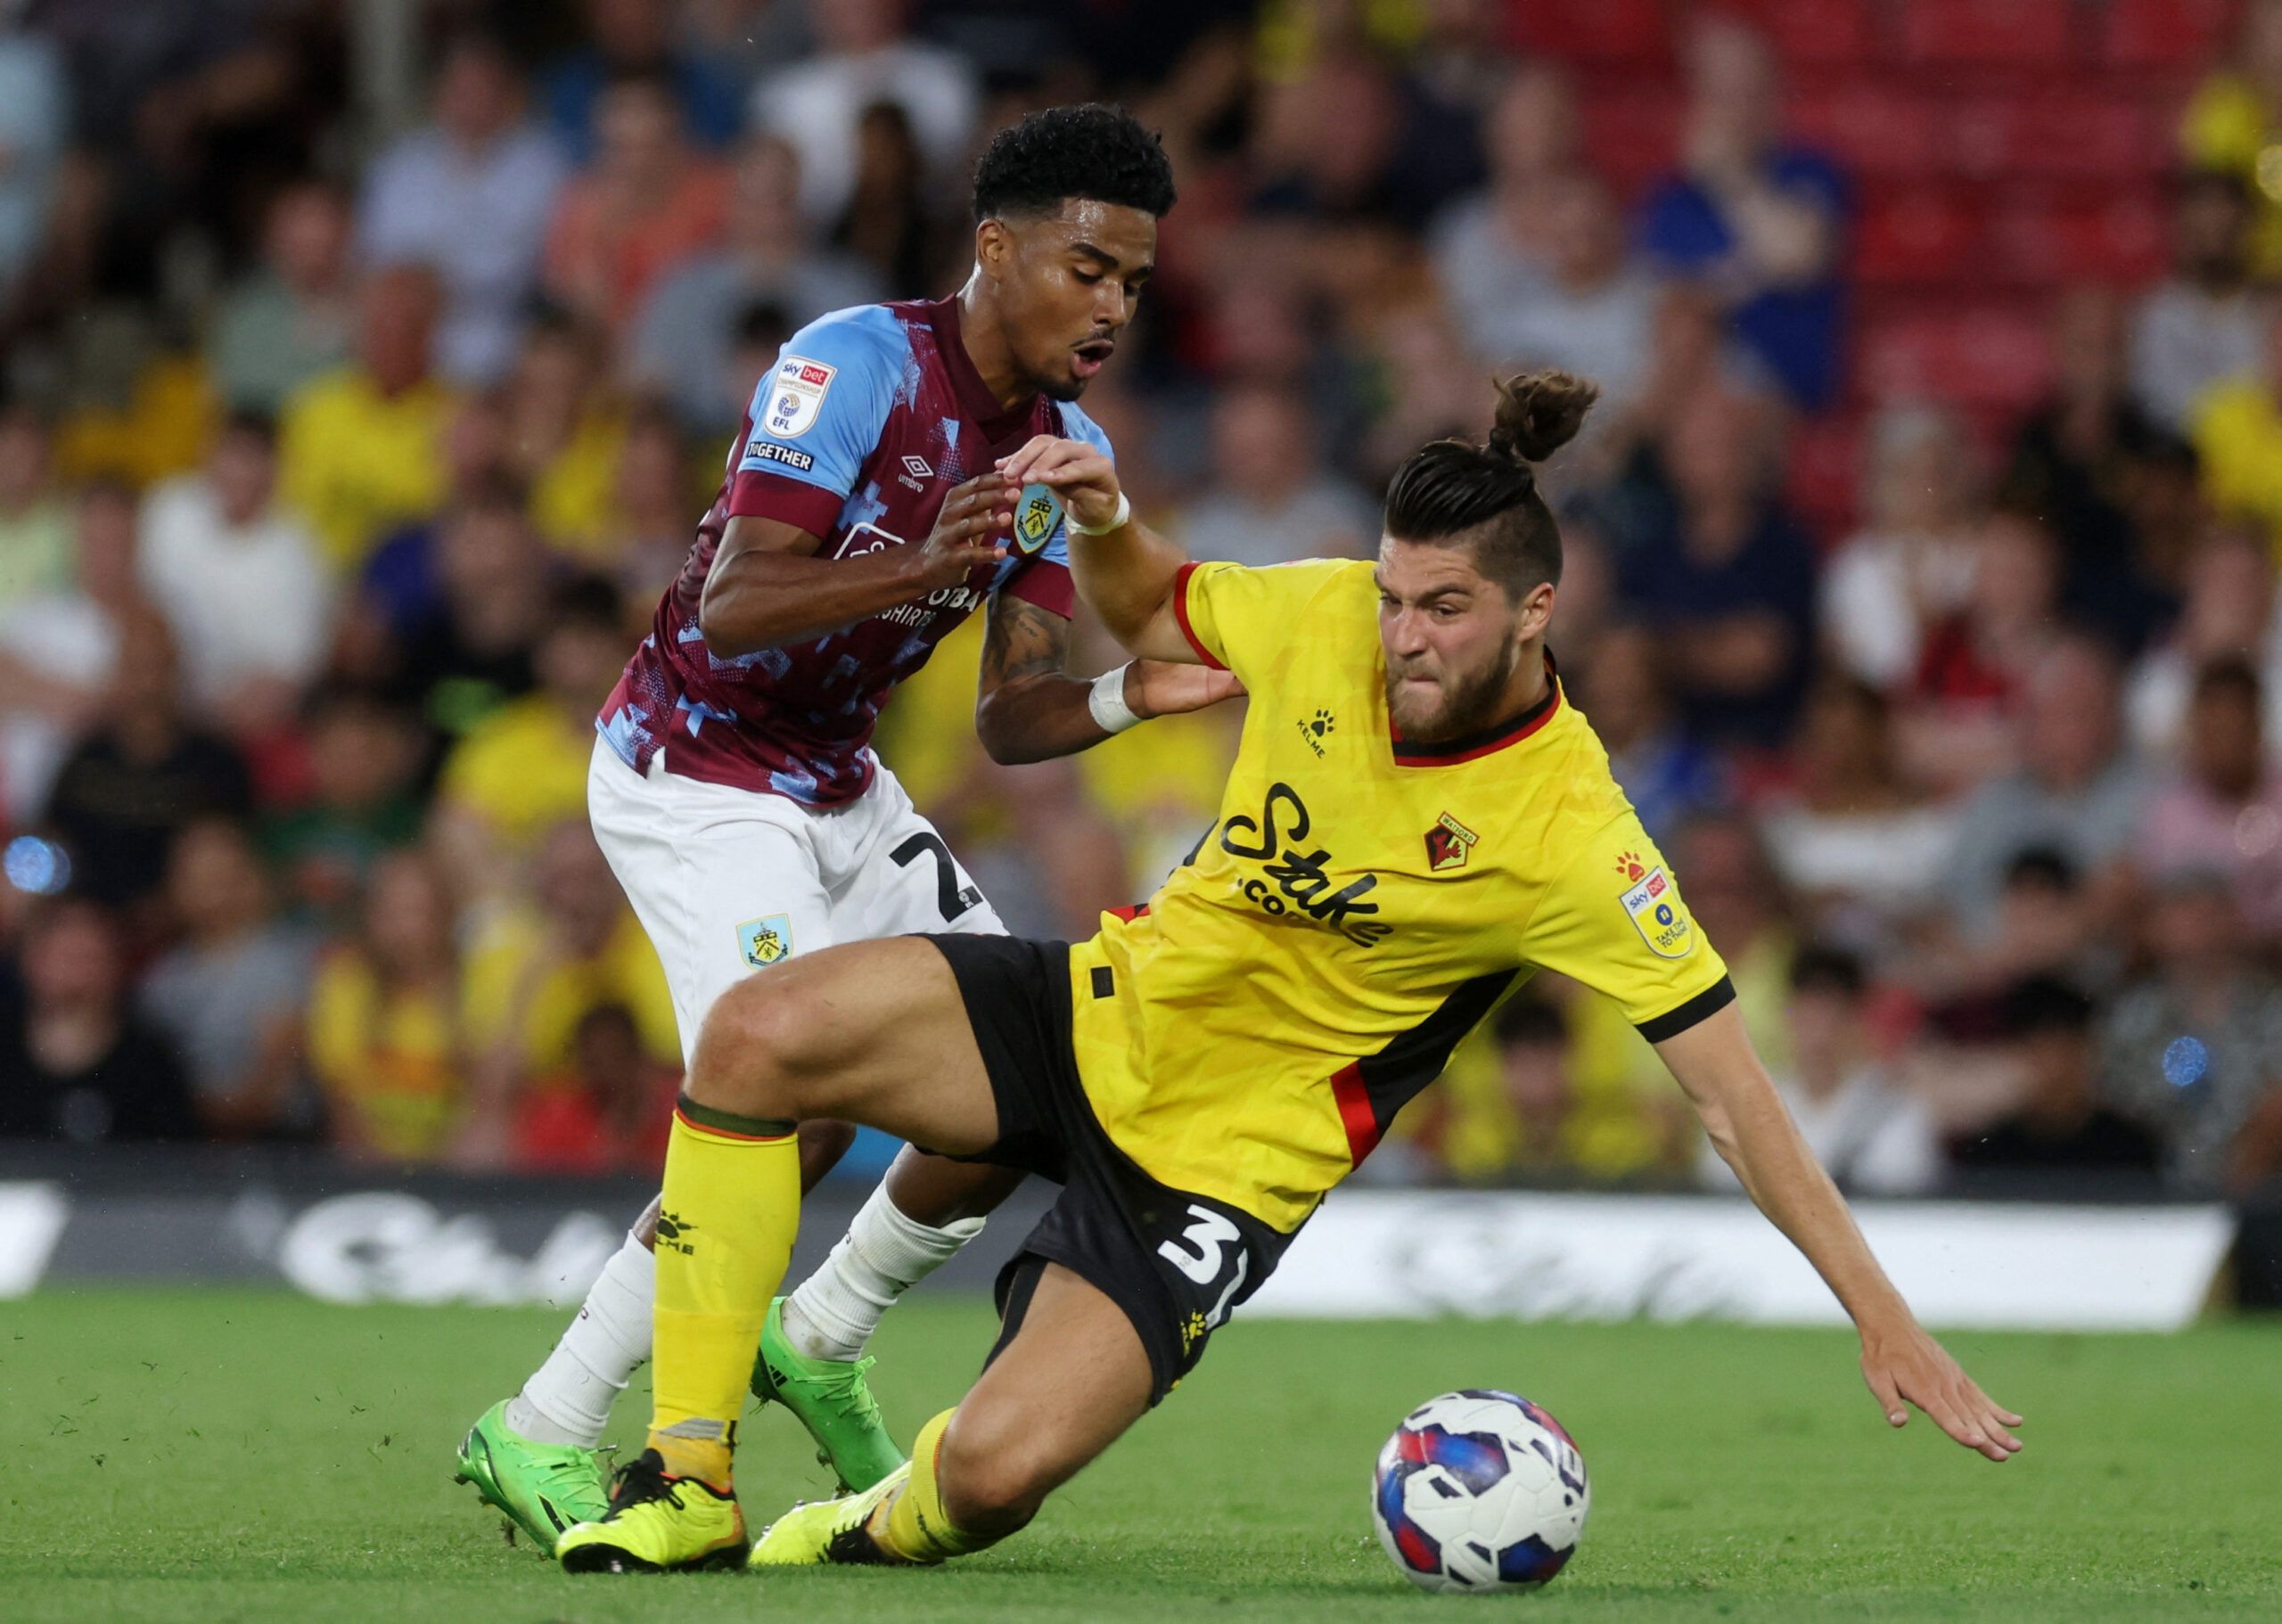 Soccer Football - Championship - Watford v Burnley - Vicarage Road, Watford, Britain - August 12, 2022 Watford's Francisco Sierralta in action with Burnley's Ian Maatsen Action Images/Paul Childs EDITORIAL USE ONLY. No use with unauthorized audio, video, data, fixture lists, club/league logos or 'live' services. Online in-match use limited to 75 images, no video emulation. No use in betting, games or single club /league/player publications.  Please contact your account representative for further